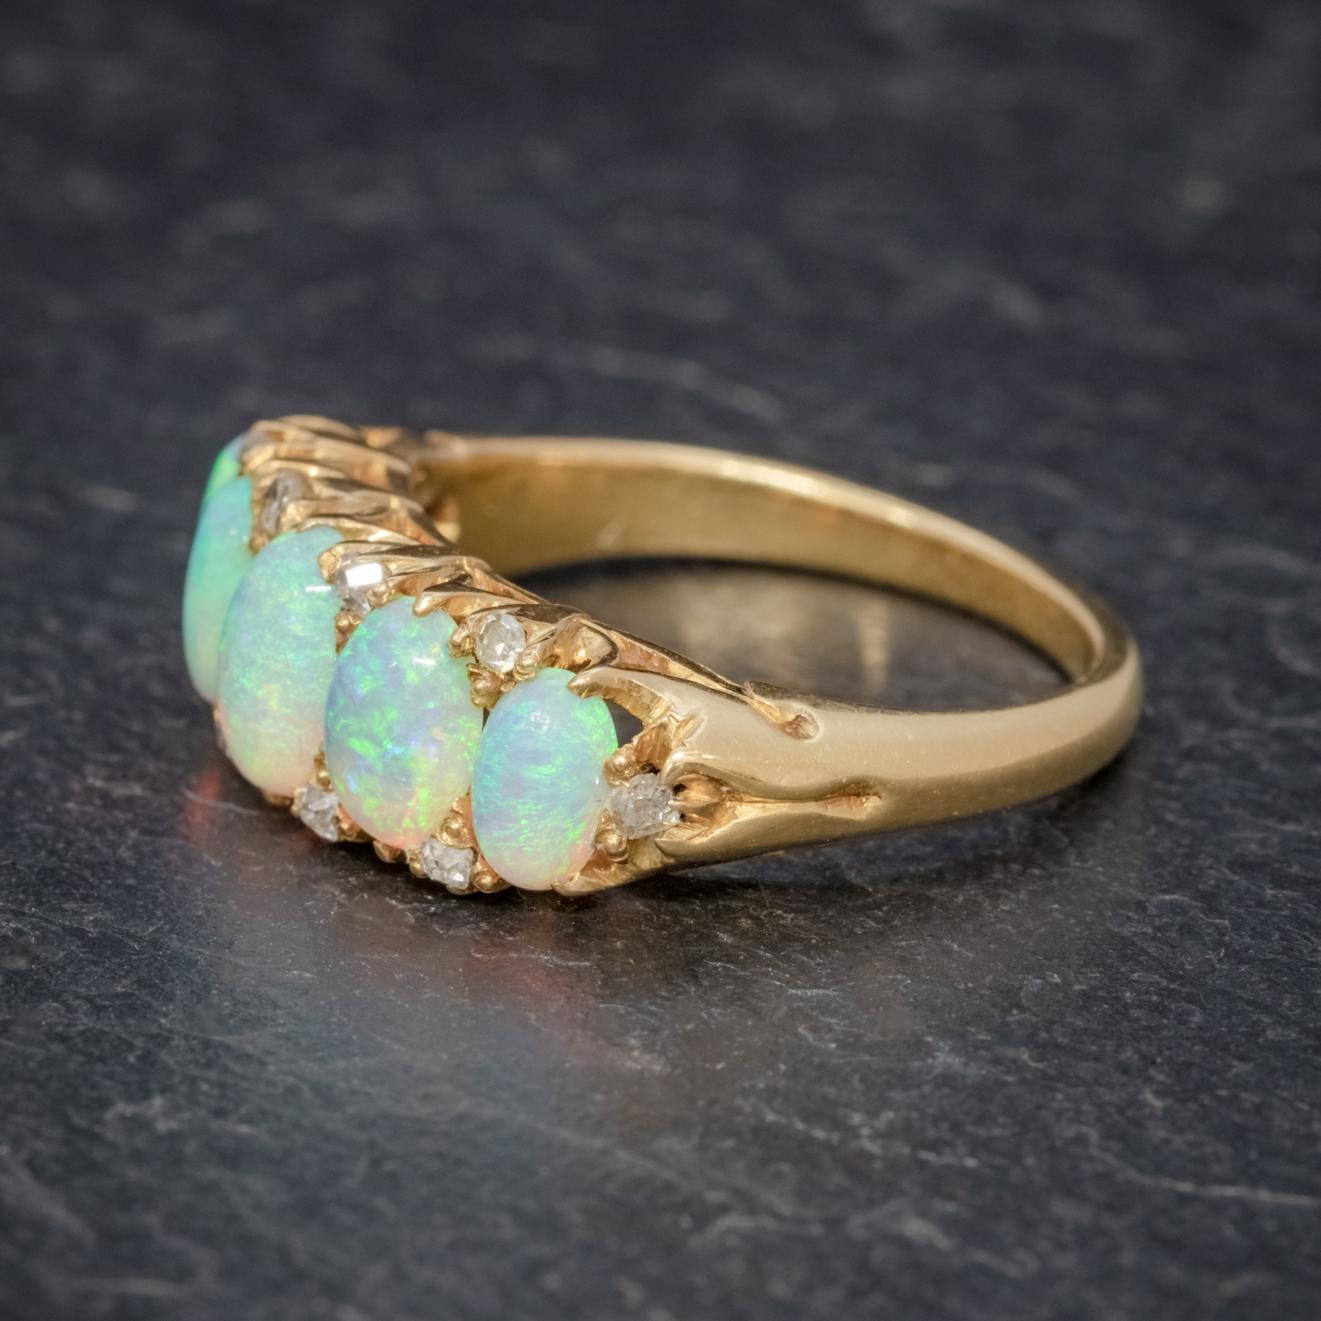 Late Victorian Antique Victorian Opal Diamond Ring 18 Carat Gold circa 1880 Boxed For Sale